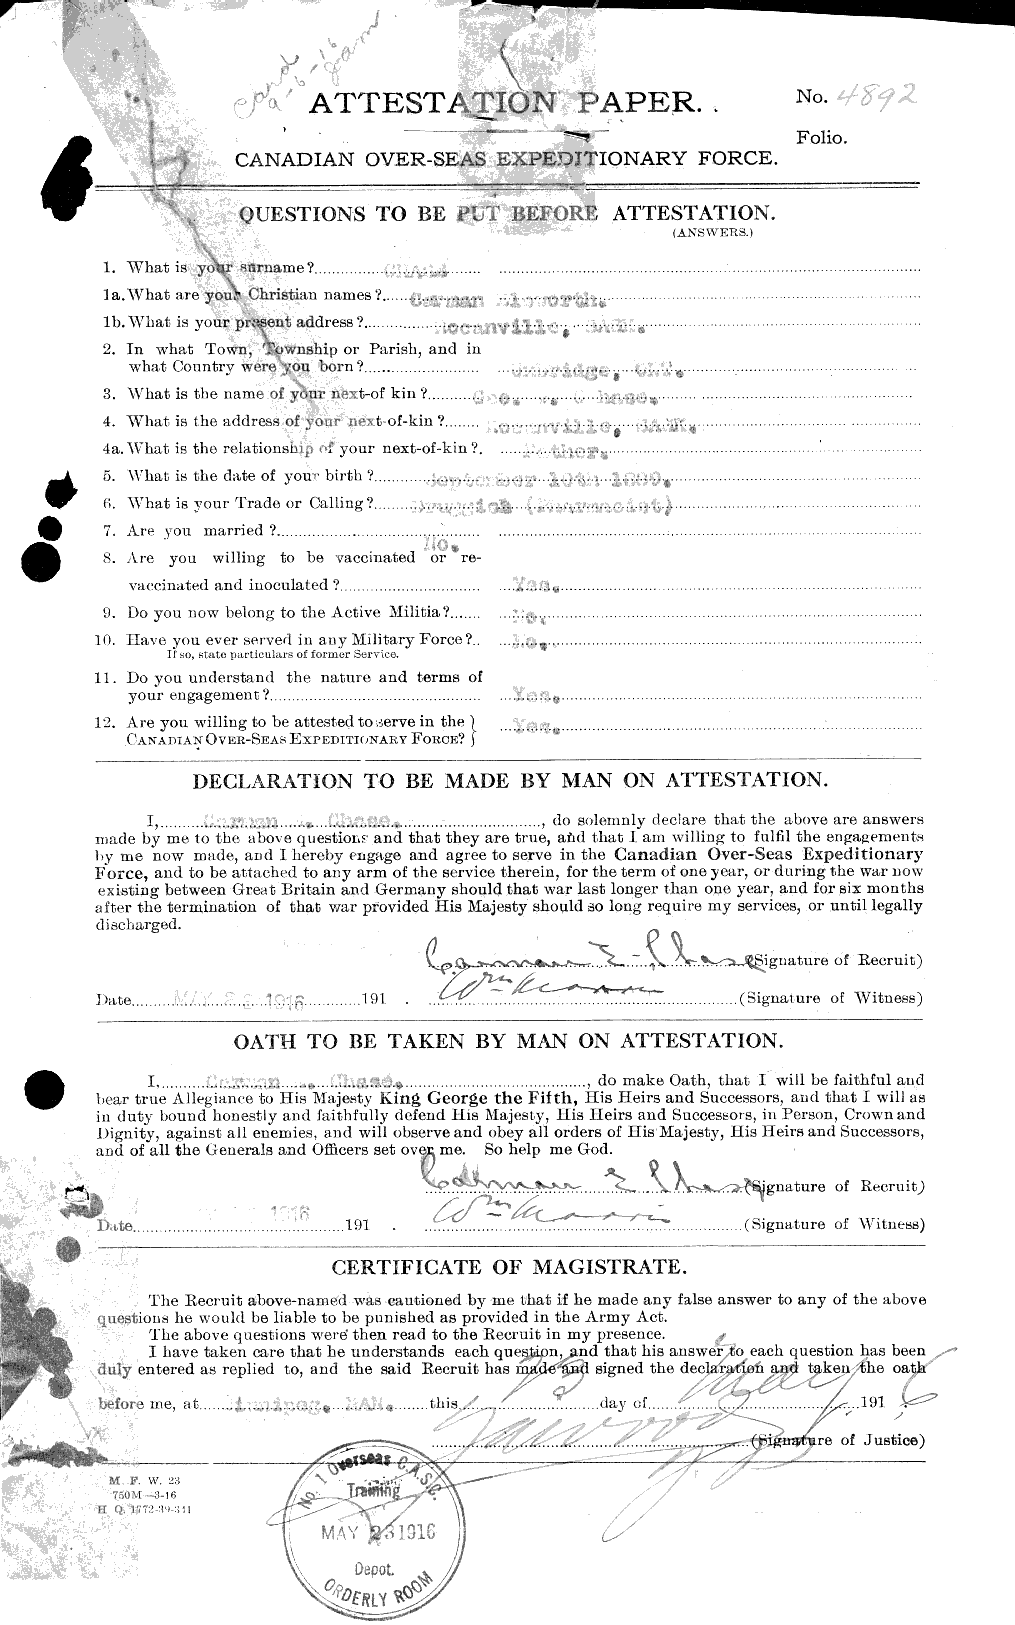 Personnel Records of the First World War - CEF 015967a